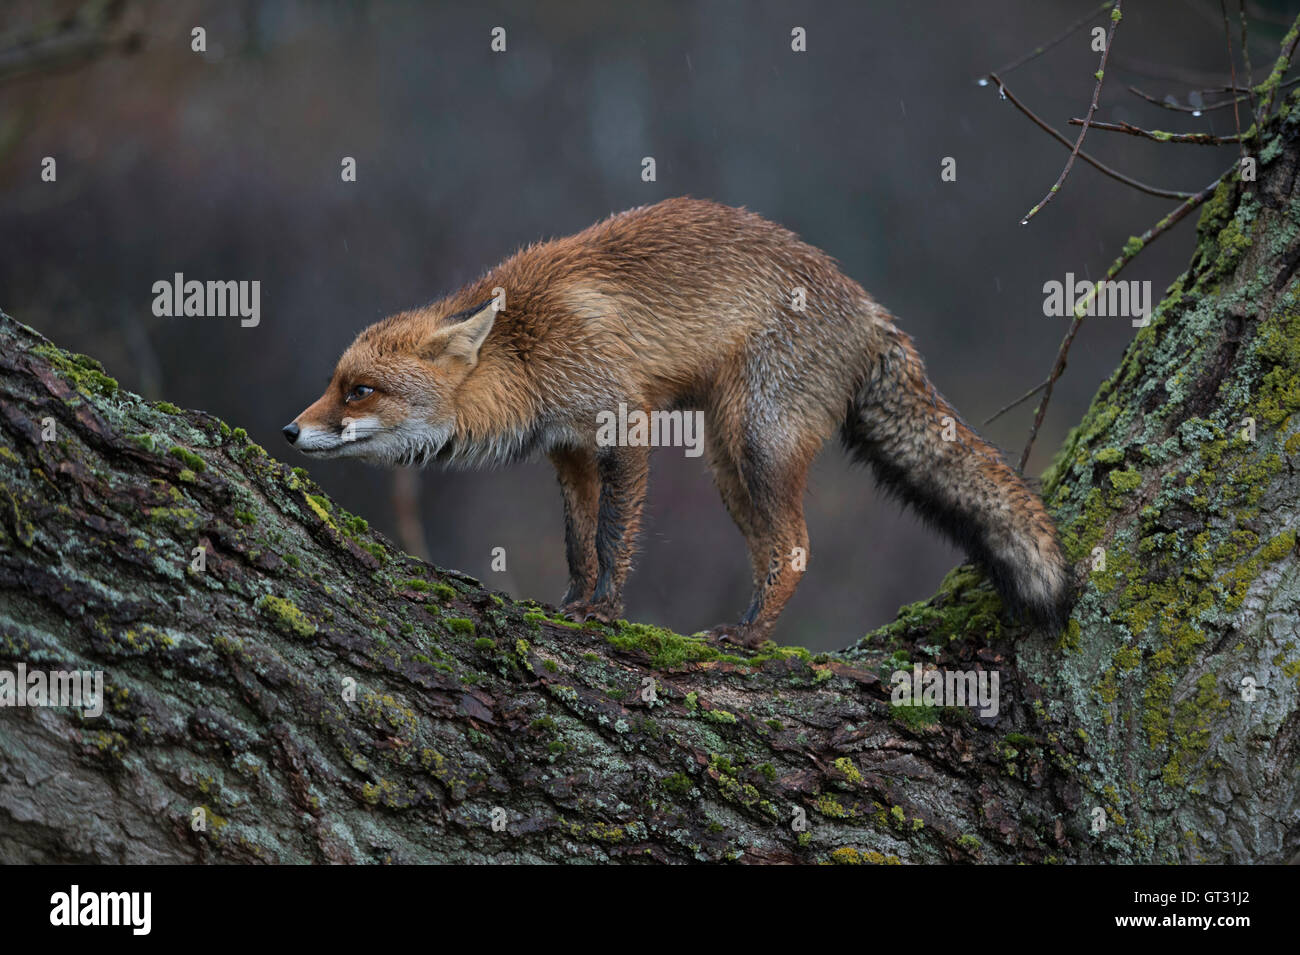 Red Fox / Rotfuchs ( Vulpes vulpes )  in funny pose, standing on a tree trunk, rainy day at dusk. Stock Photo